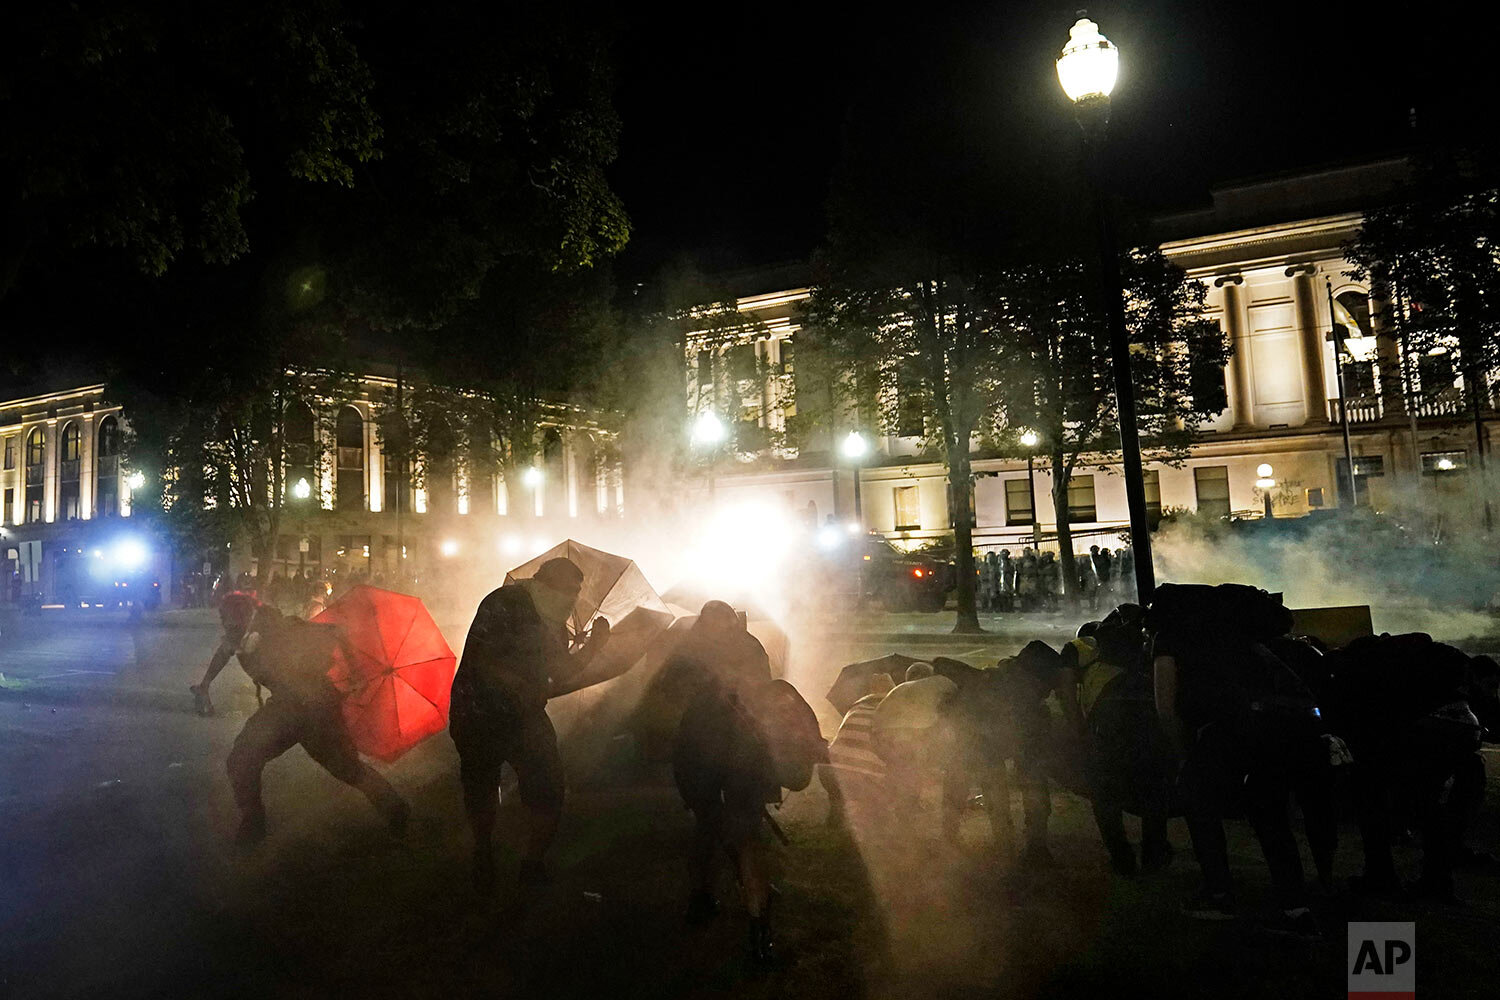  Protesters take cover from tear gas fired by police outside the Kenosha County Courthouse, late Monday, Aug. 24, 2020, in Kenosha, Wis. (AP Photo/David Goldman) 